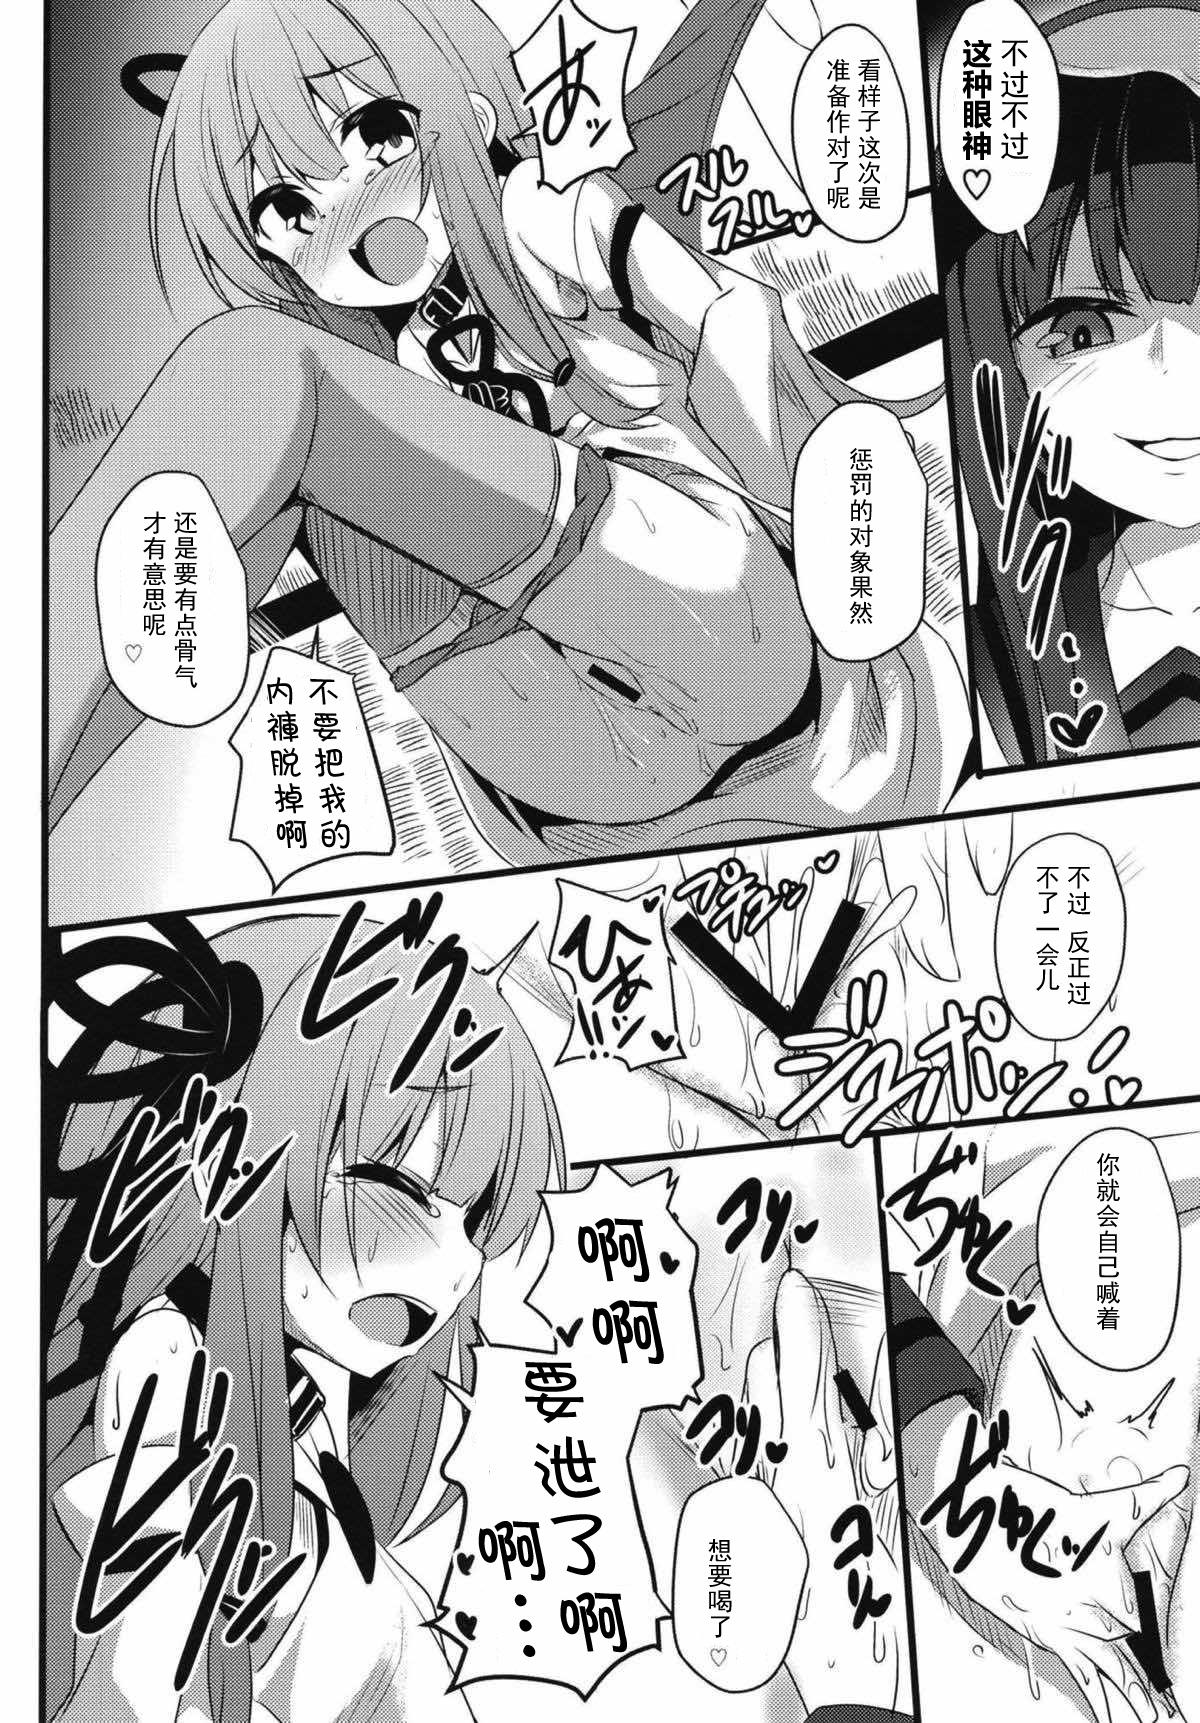 Indian (Kotonoha's Festa 2) [Milk Pudding (Jamcy)] Akane-chan Challenge! 2.5-kaime (VOICEROID) [Chinese] [古早个人汉化] - Voiceroid Hot Naked Women - Page 12